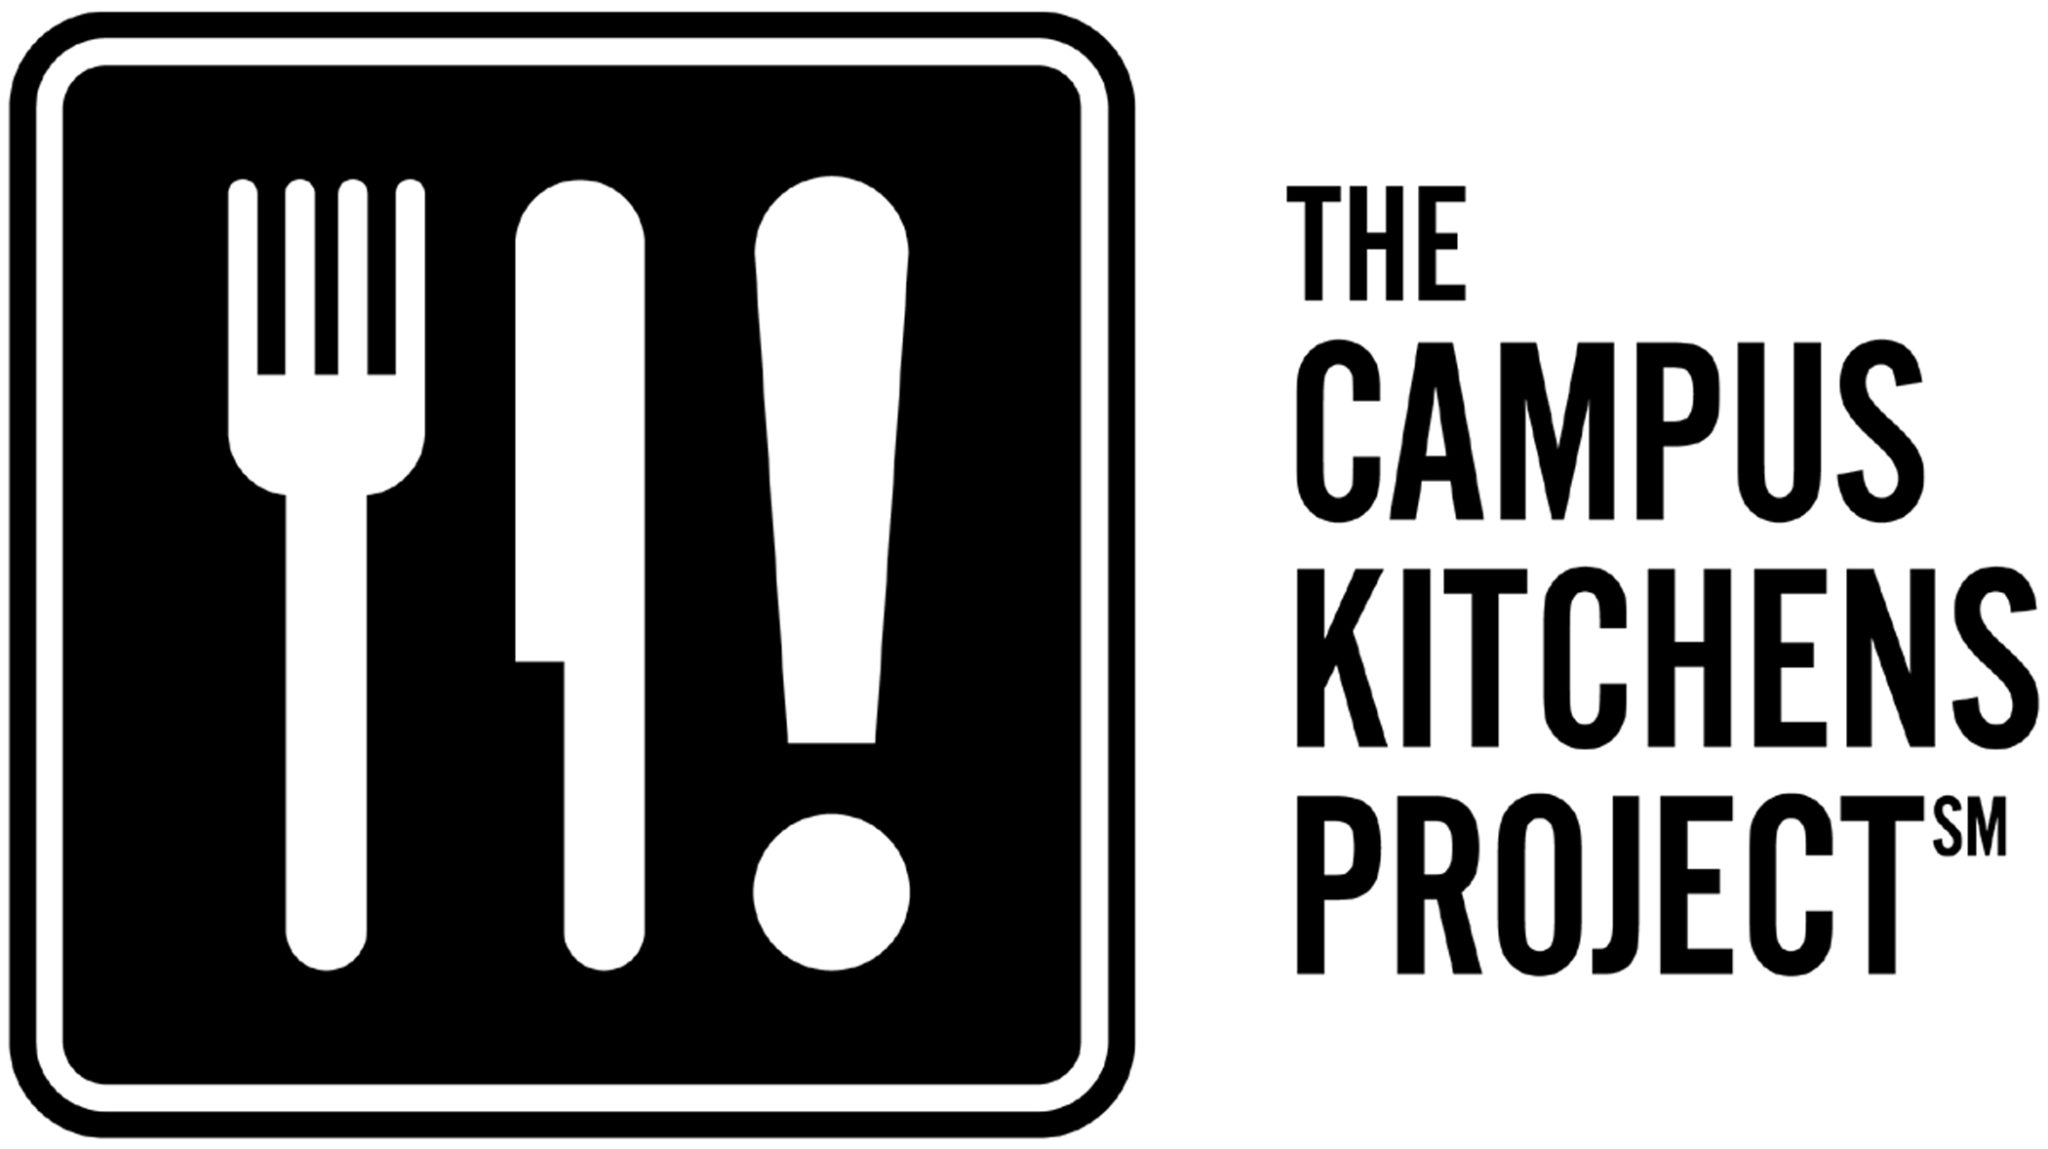 The Campus Kitchens Project logo